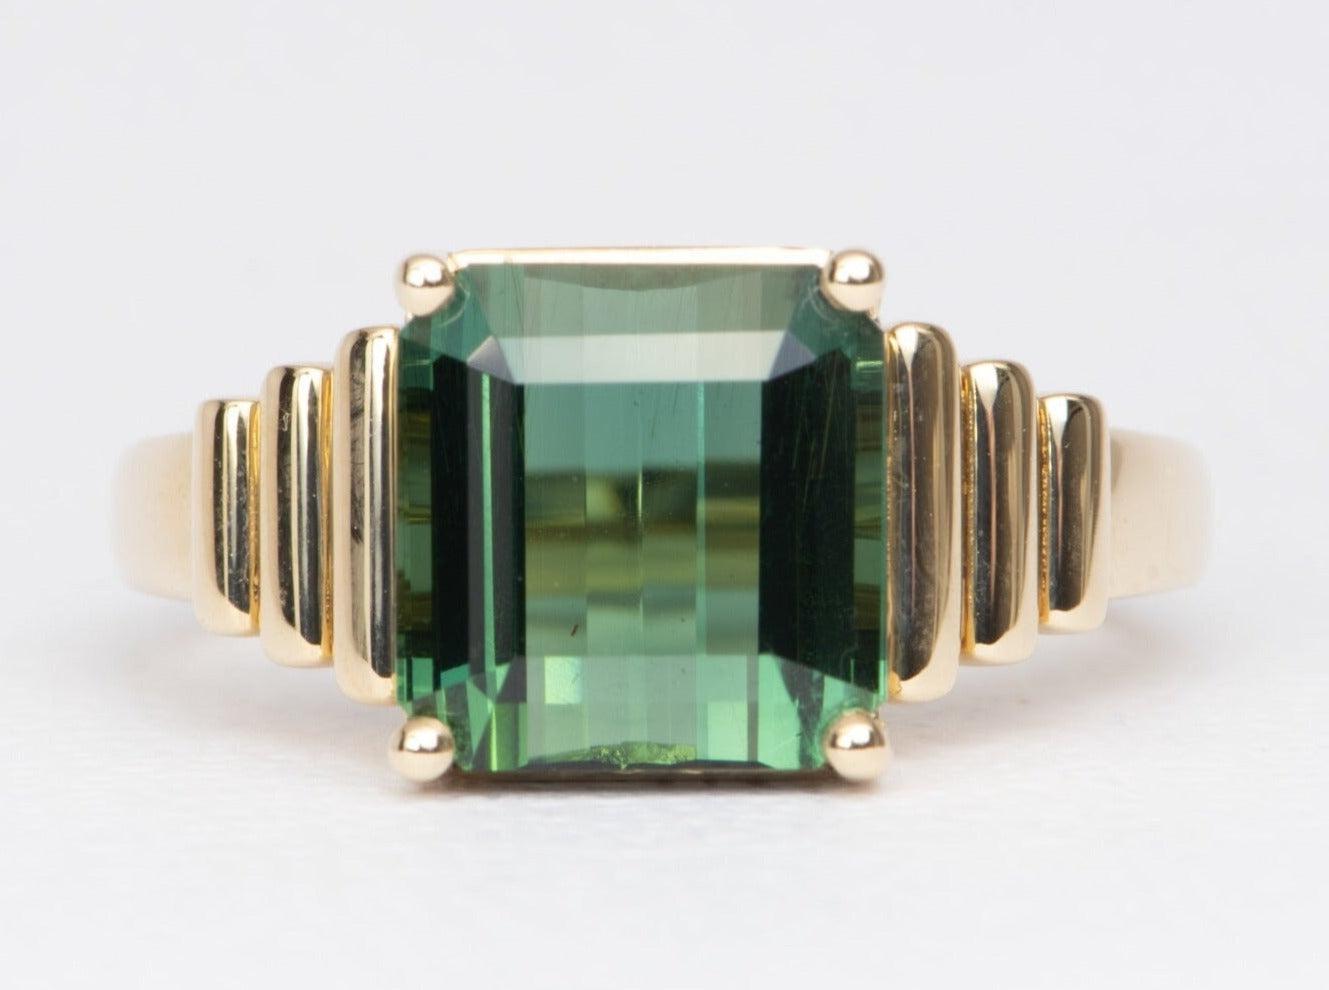 ♥ Solid 14k yellow gold ring set with a beautiful tourmaline in a wide ribbed design
♥ Gorgeous green color!
♥ The item measures 10.2 mm in length, 9.6 mm in width, and stands 7.3 mm from the finger

♥ US Size 8 (Free resizing up or down 1 size)
♥